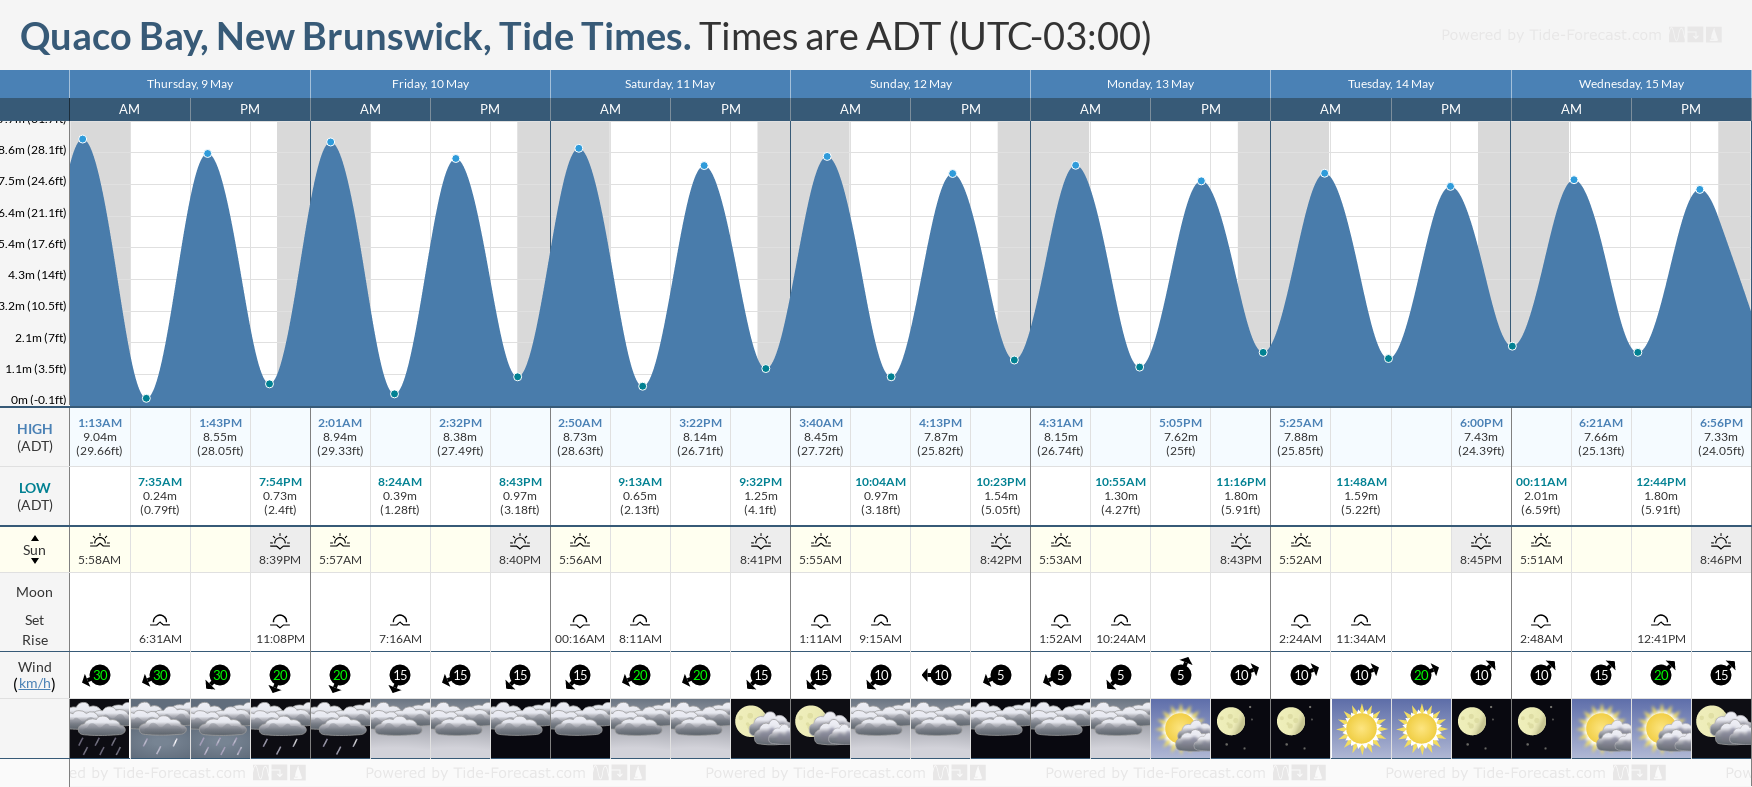 Quaco Bay, New Brunswick Tide Chart including high and low tide times for the next 7 days